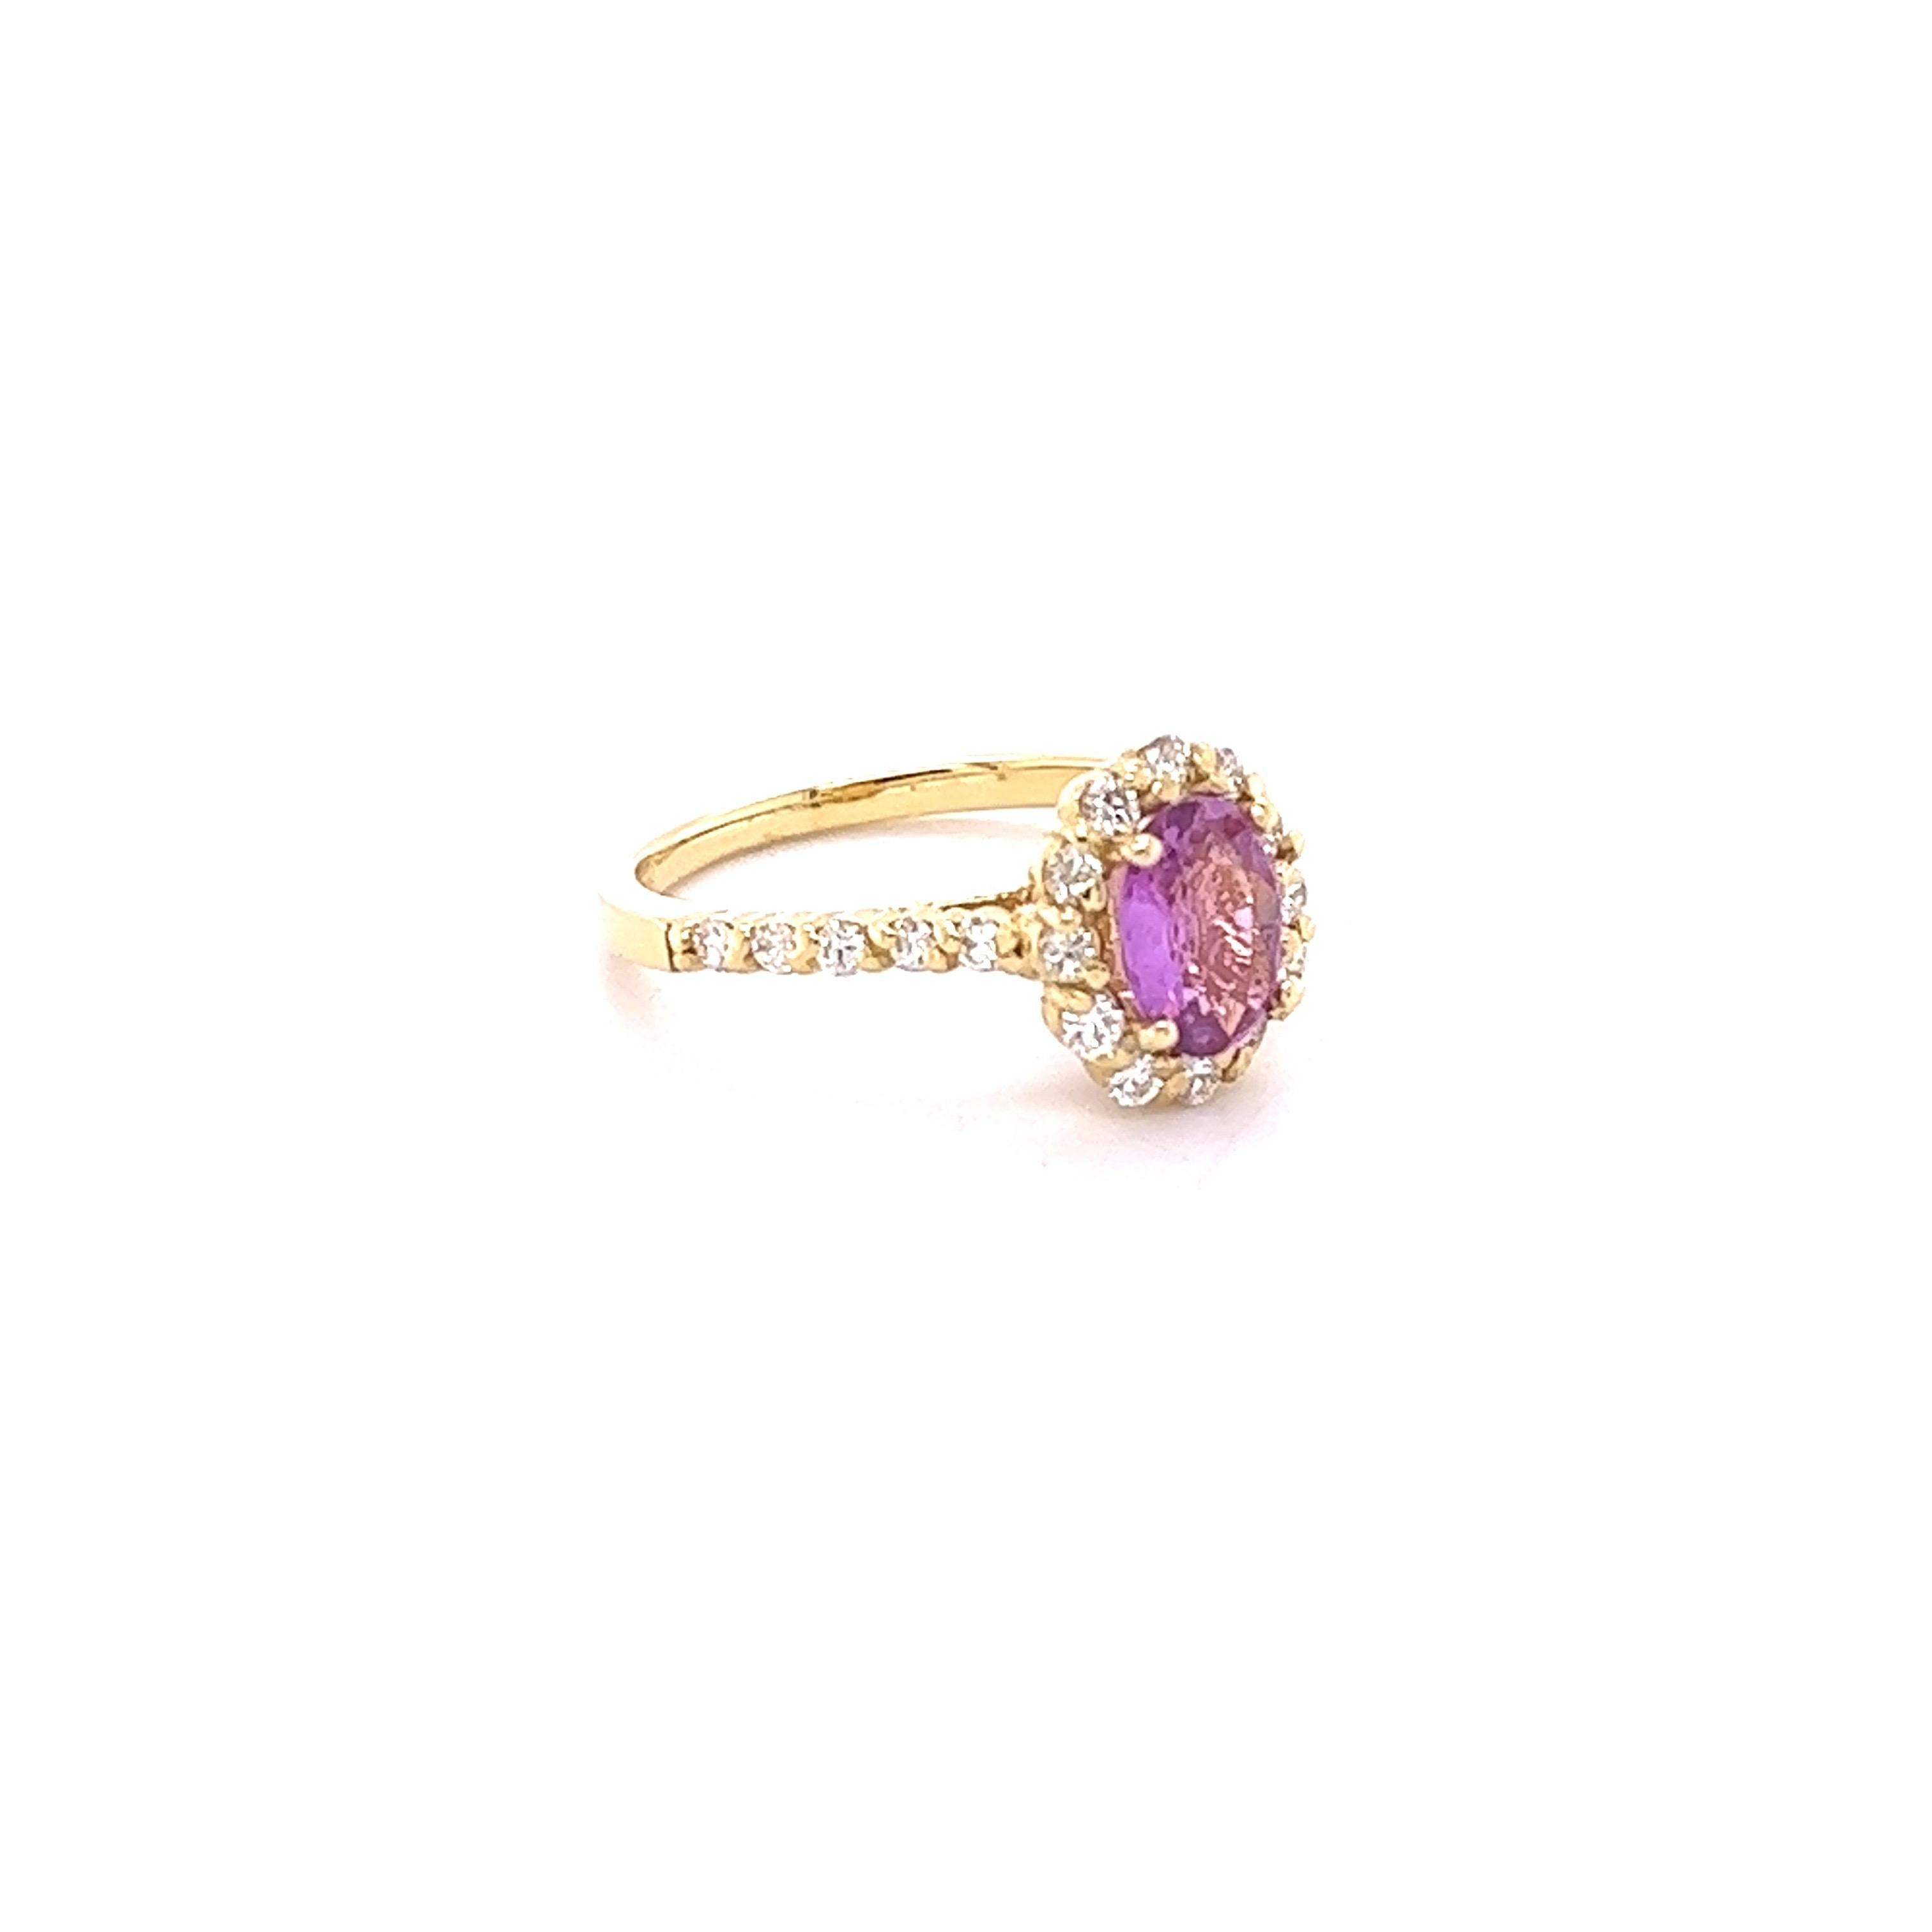 This beautiful ring has a Natural No Heat Oval Cut Pink Sapphire that weights 1.11 Carats and measures at 8 mm x 6 mm.

The ring is embellished with 24 Round Cut Diamonds that weigh 0.52 Carats with a clarity and color of VS/H. The total carat